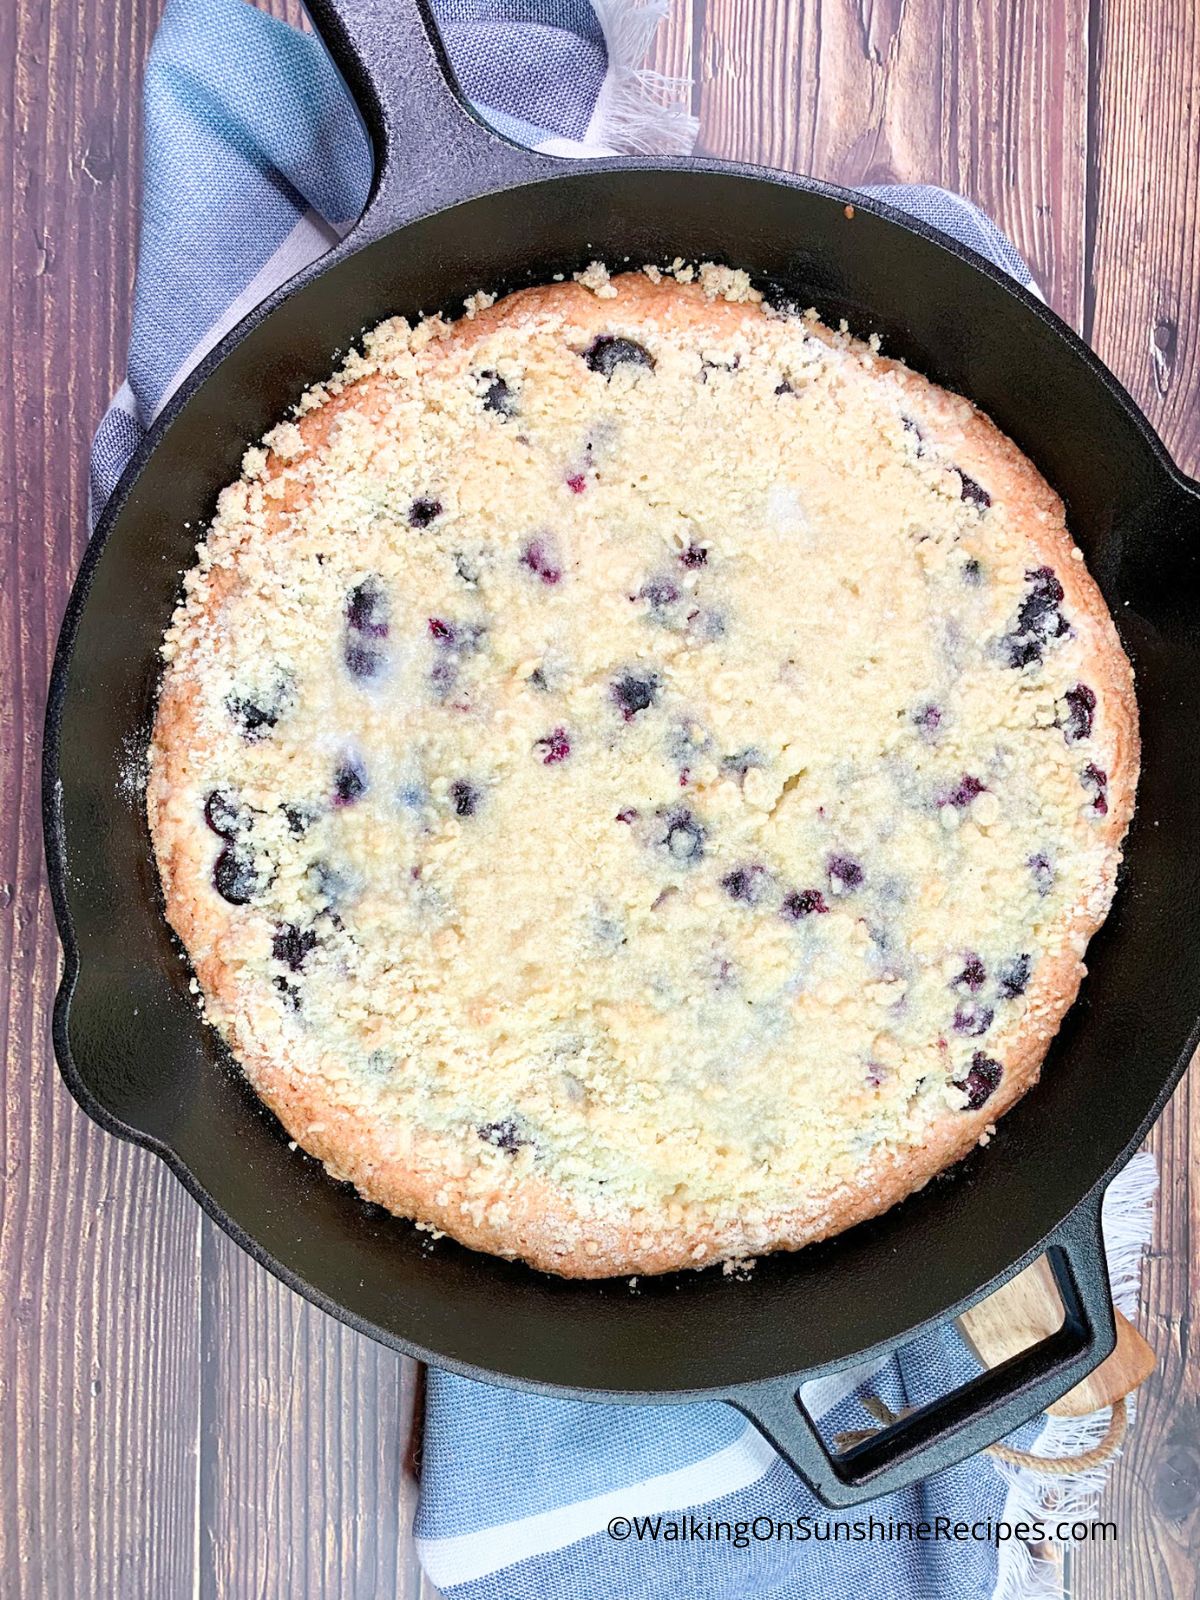 Blueberry Crumb Cake in skillet pan baked.